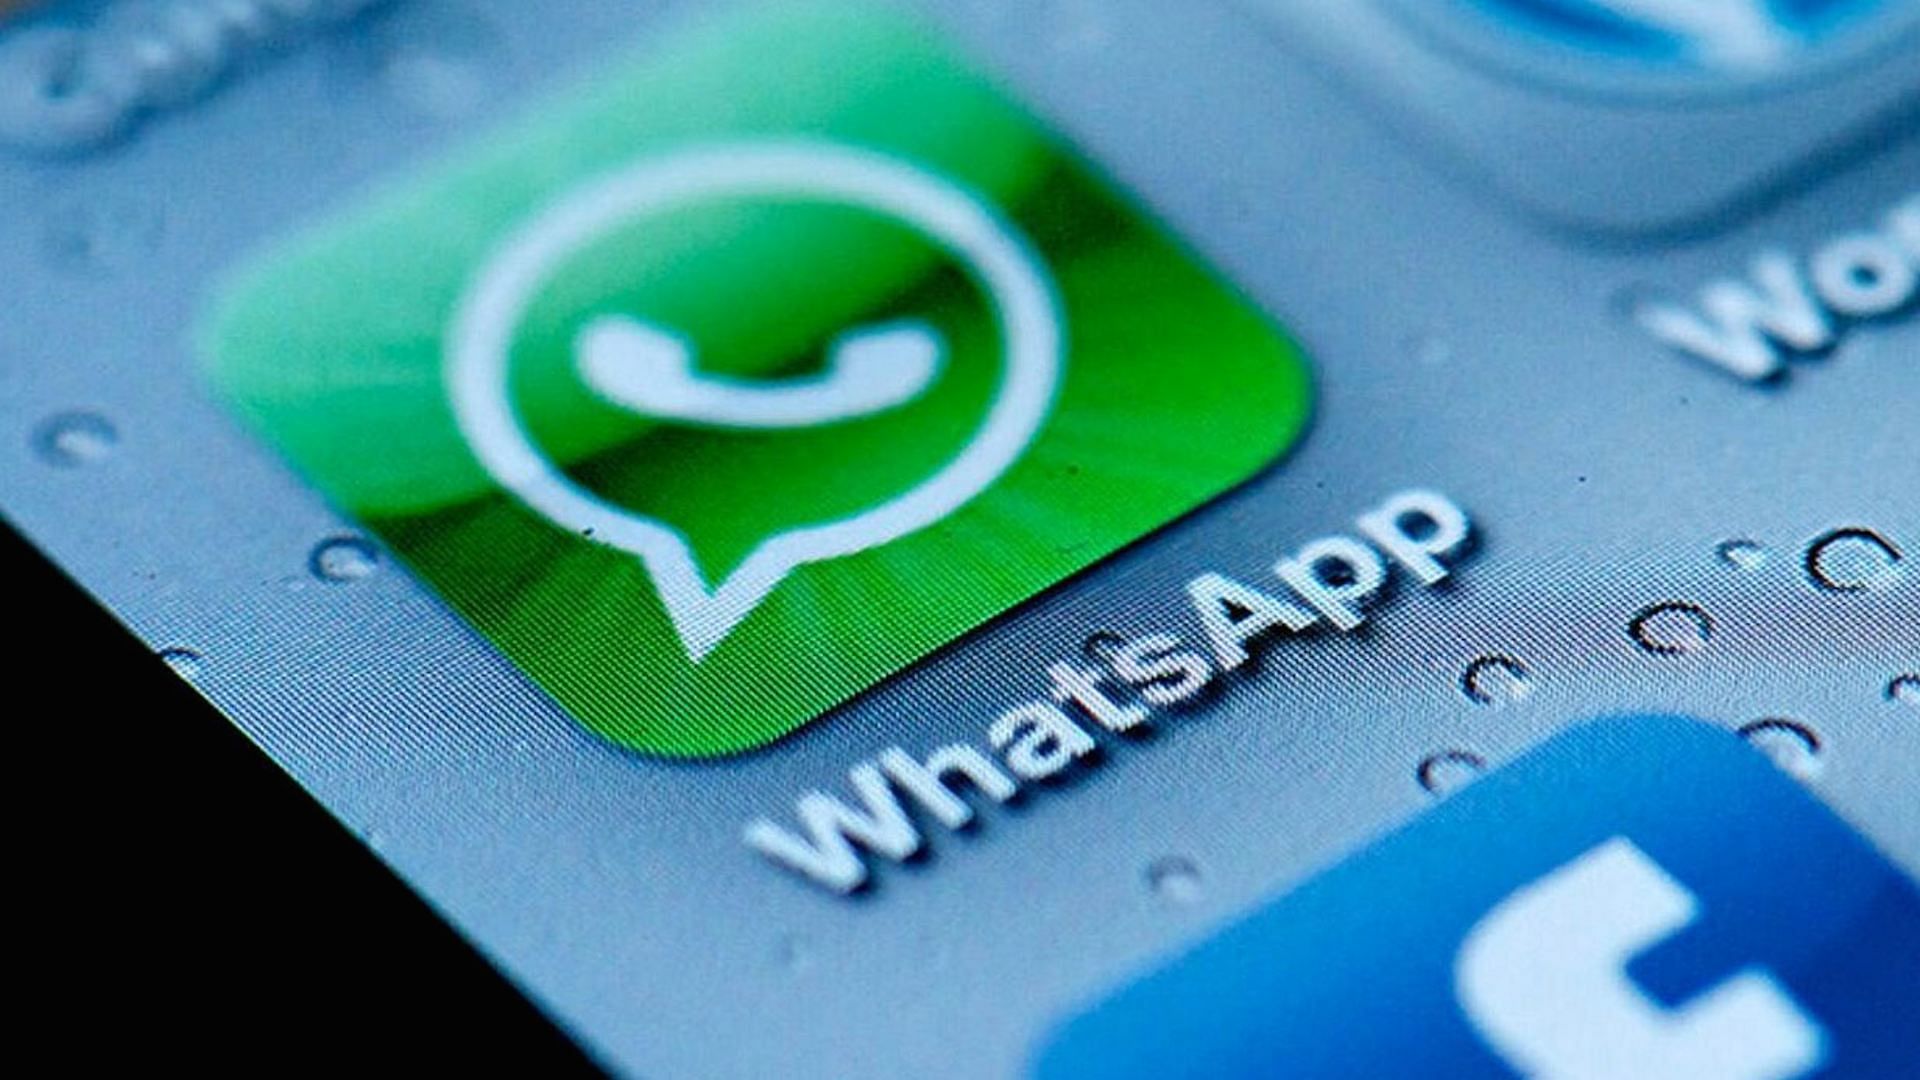 WhatsApp groups can now have 256 members. (Photo: iStockphoto)